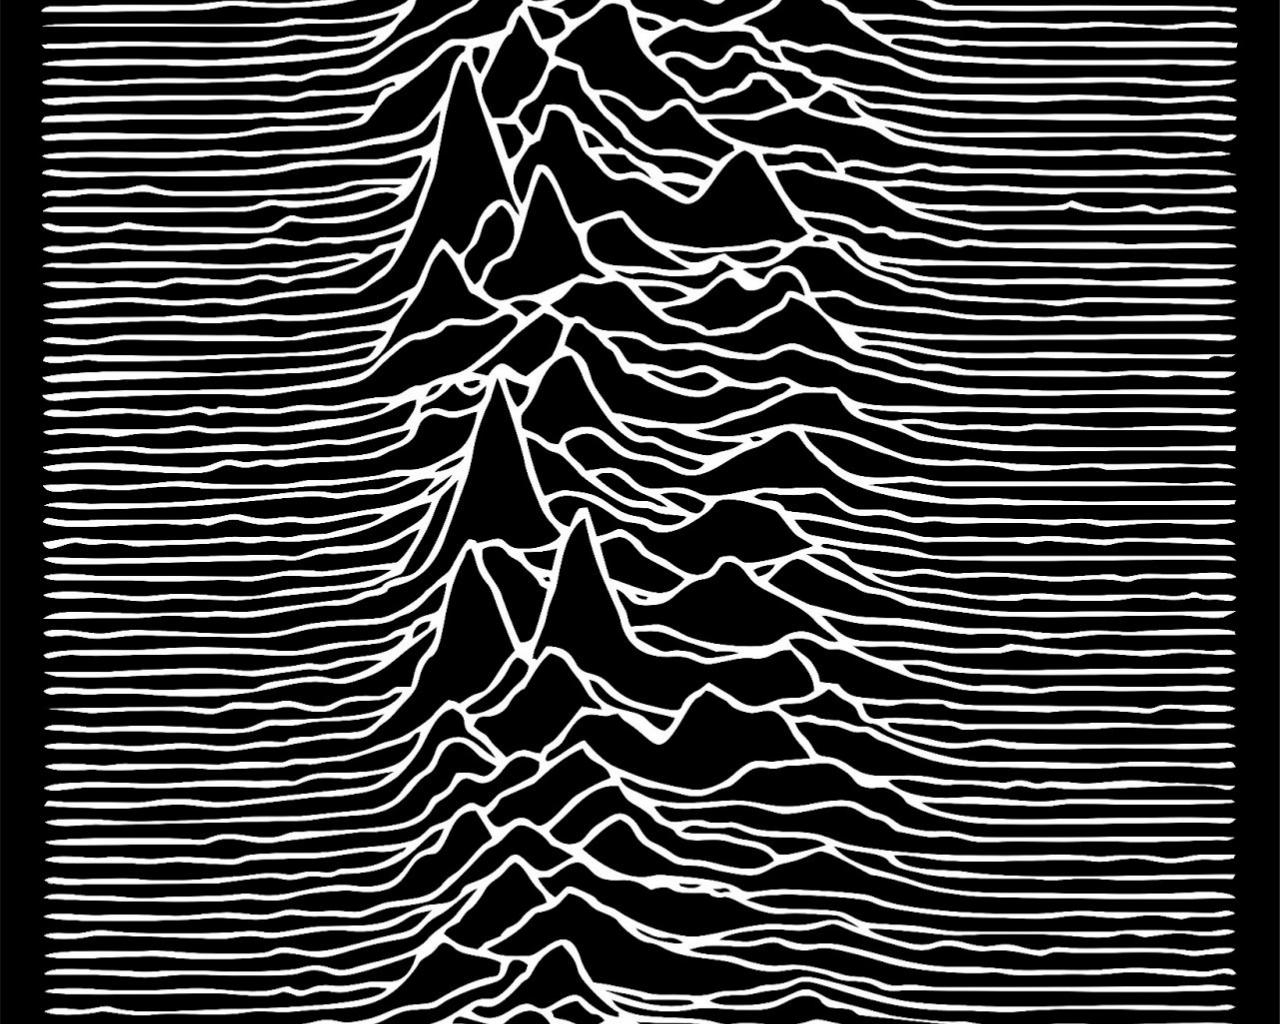 Joy Division - Unknown Pleasures | TRACK RANKING #3 - YouTube